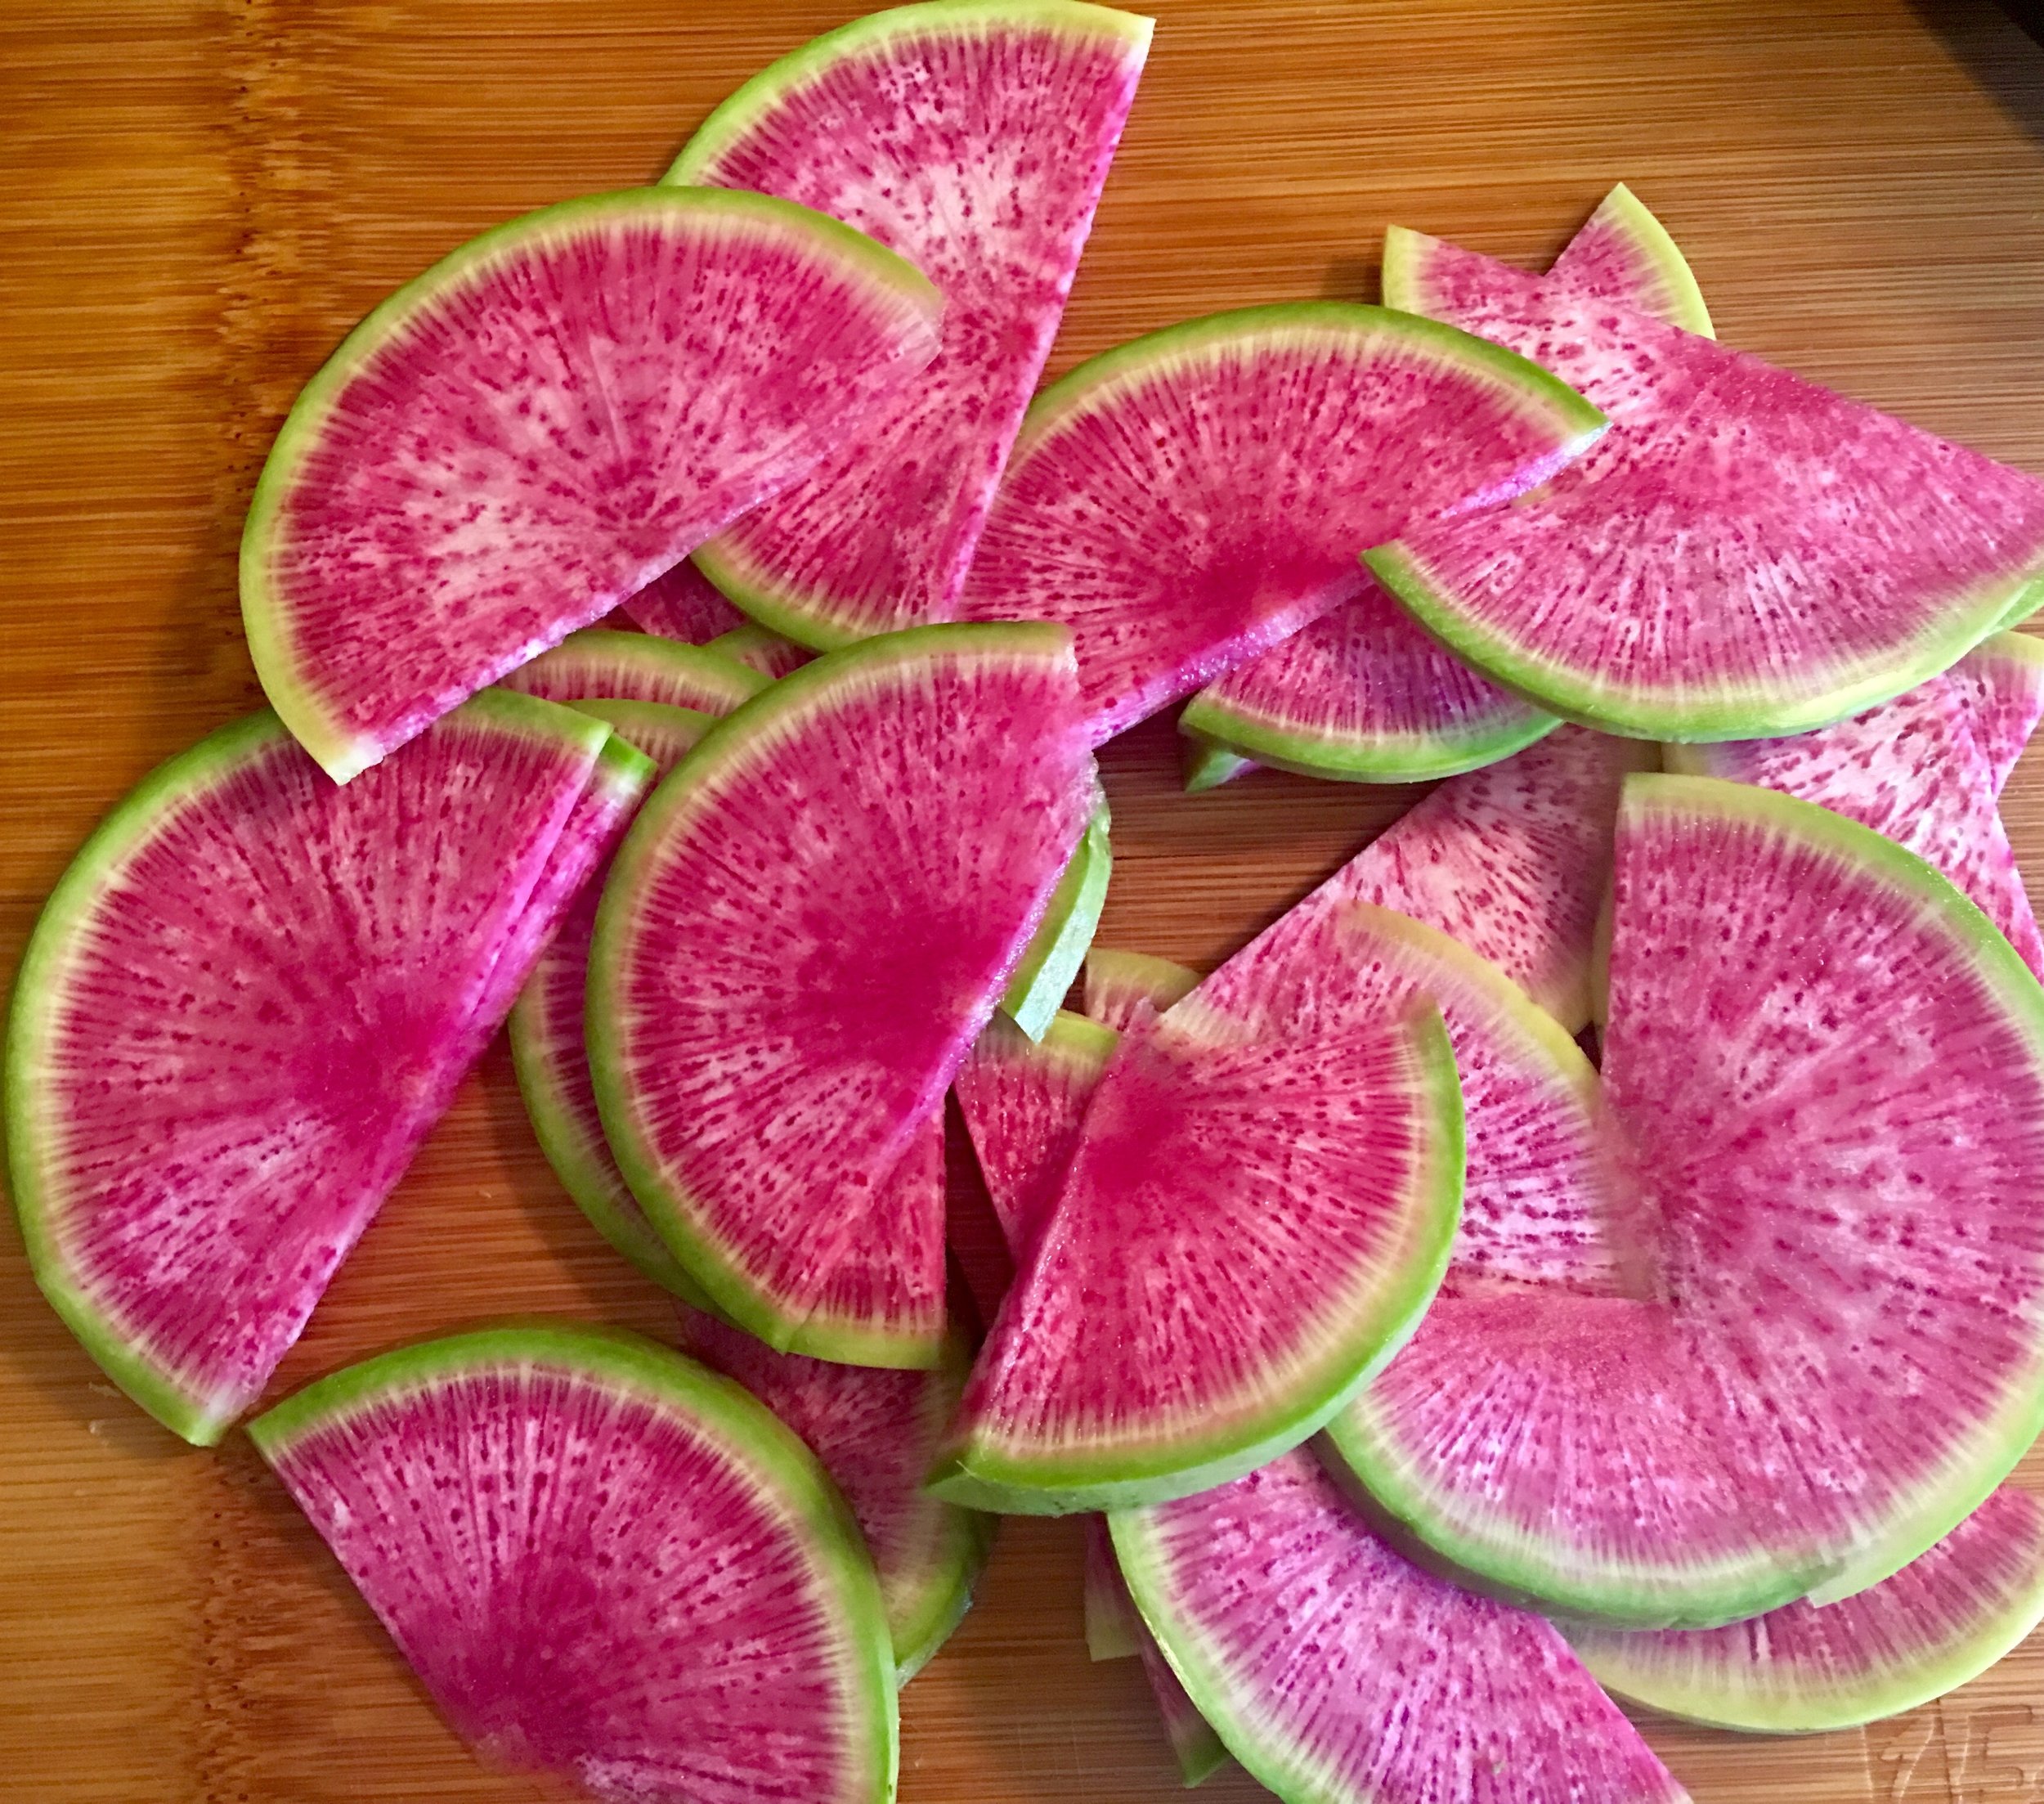 Watermelon Radishes Your Daily Serving